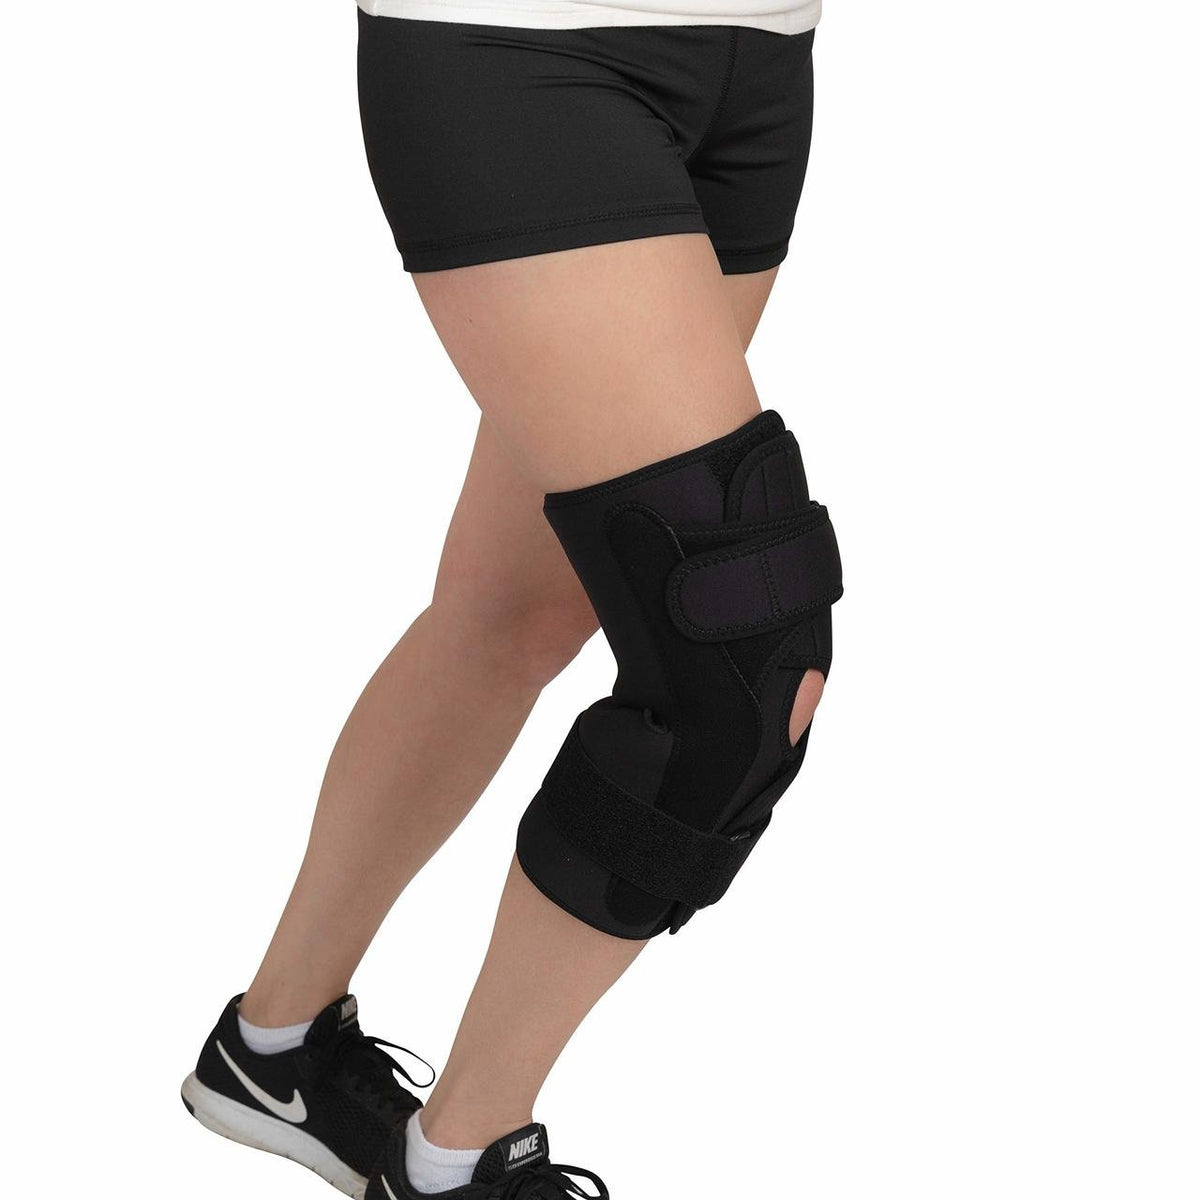 Bariatric Open Patella Plus Size Hinged Knee Brace for Men and Women - Supports Meniscus Tears, Arthritis Joint Pain, Ligament Injuries & Sprains